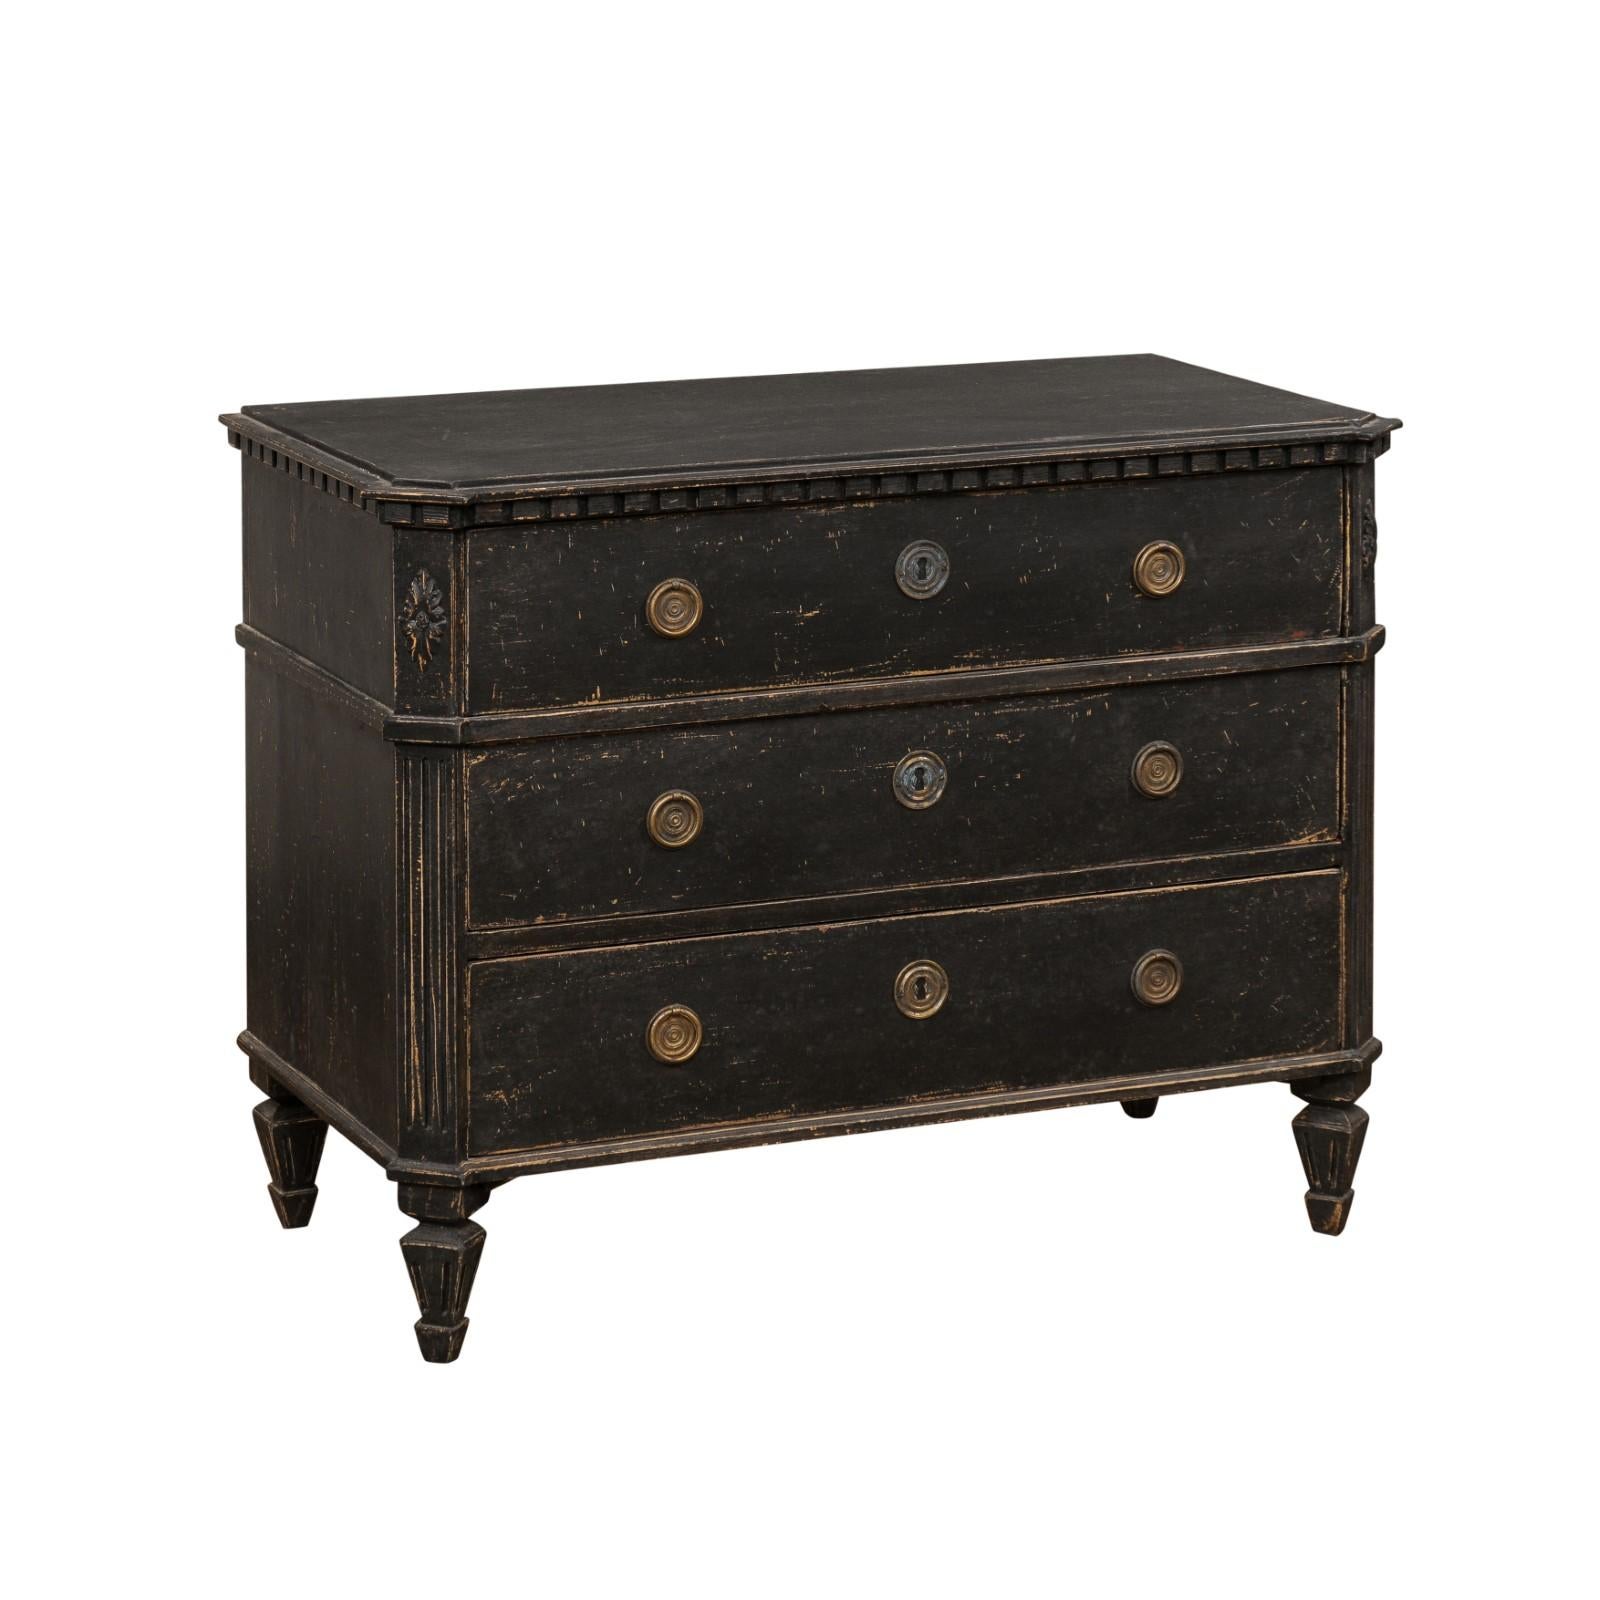 A Swedish Gustavian period black painted chest of drawers from the early 19th century, with dentil molding and carved side posts. Created in Sweden during the second quarter of the 19th century, This Gustavian chest features a rectangular, slightly